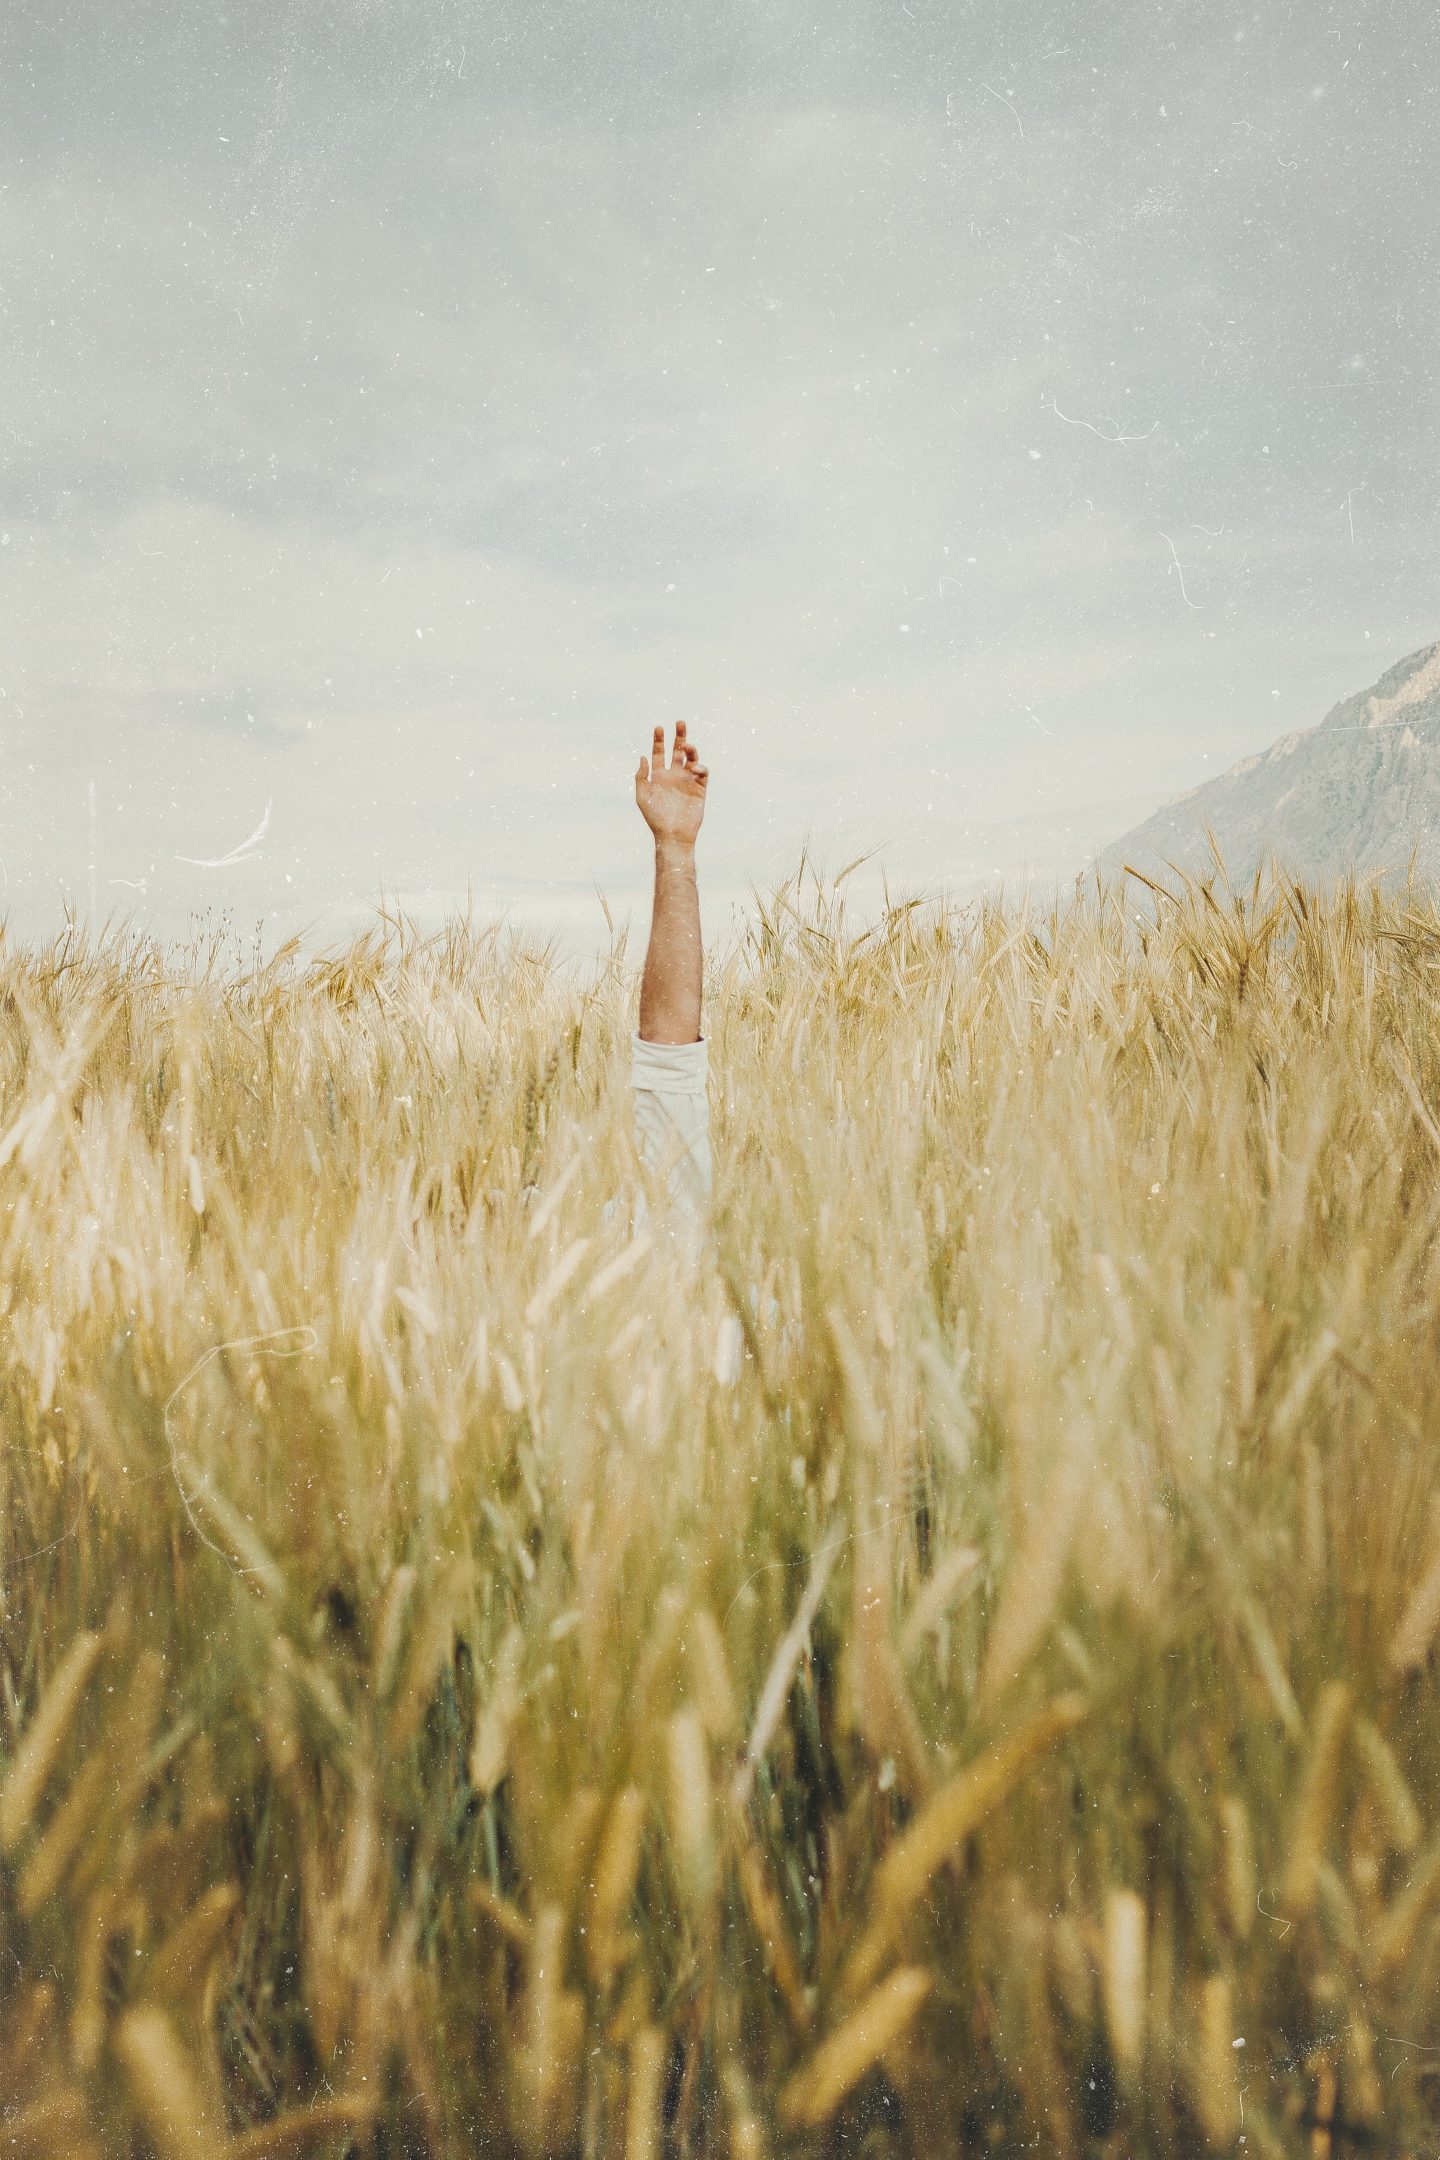 Hand emerging from a field of wheat